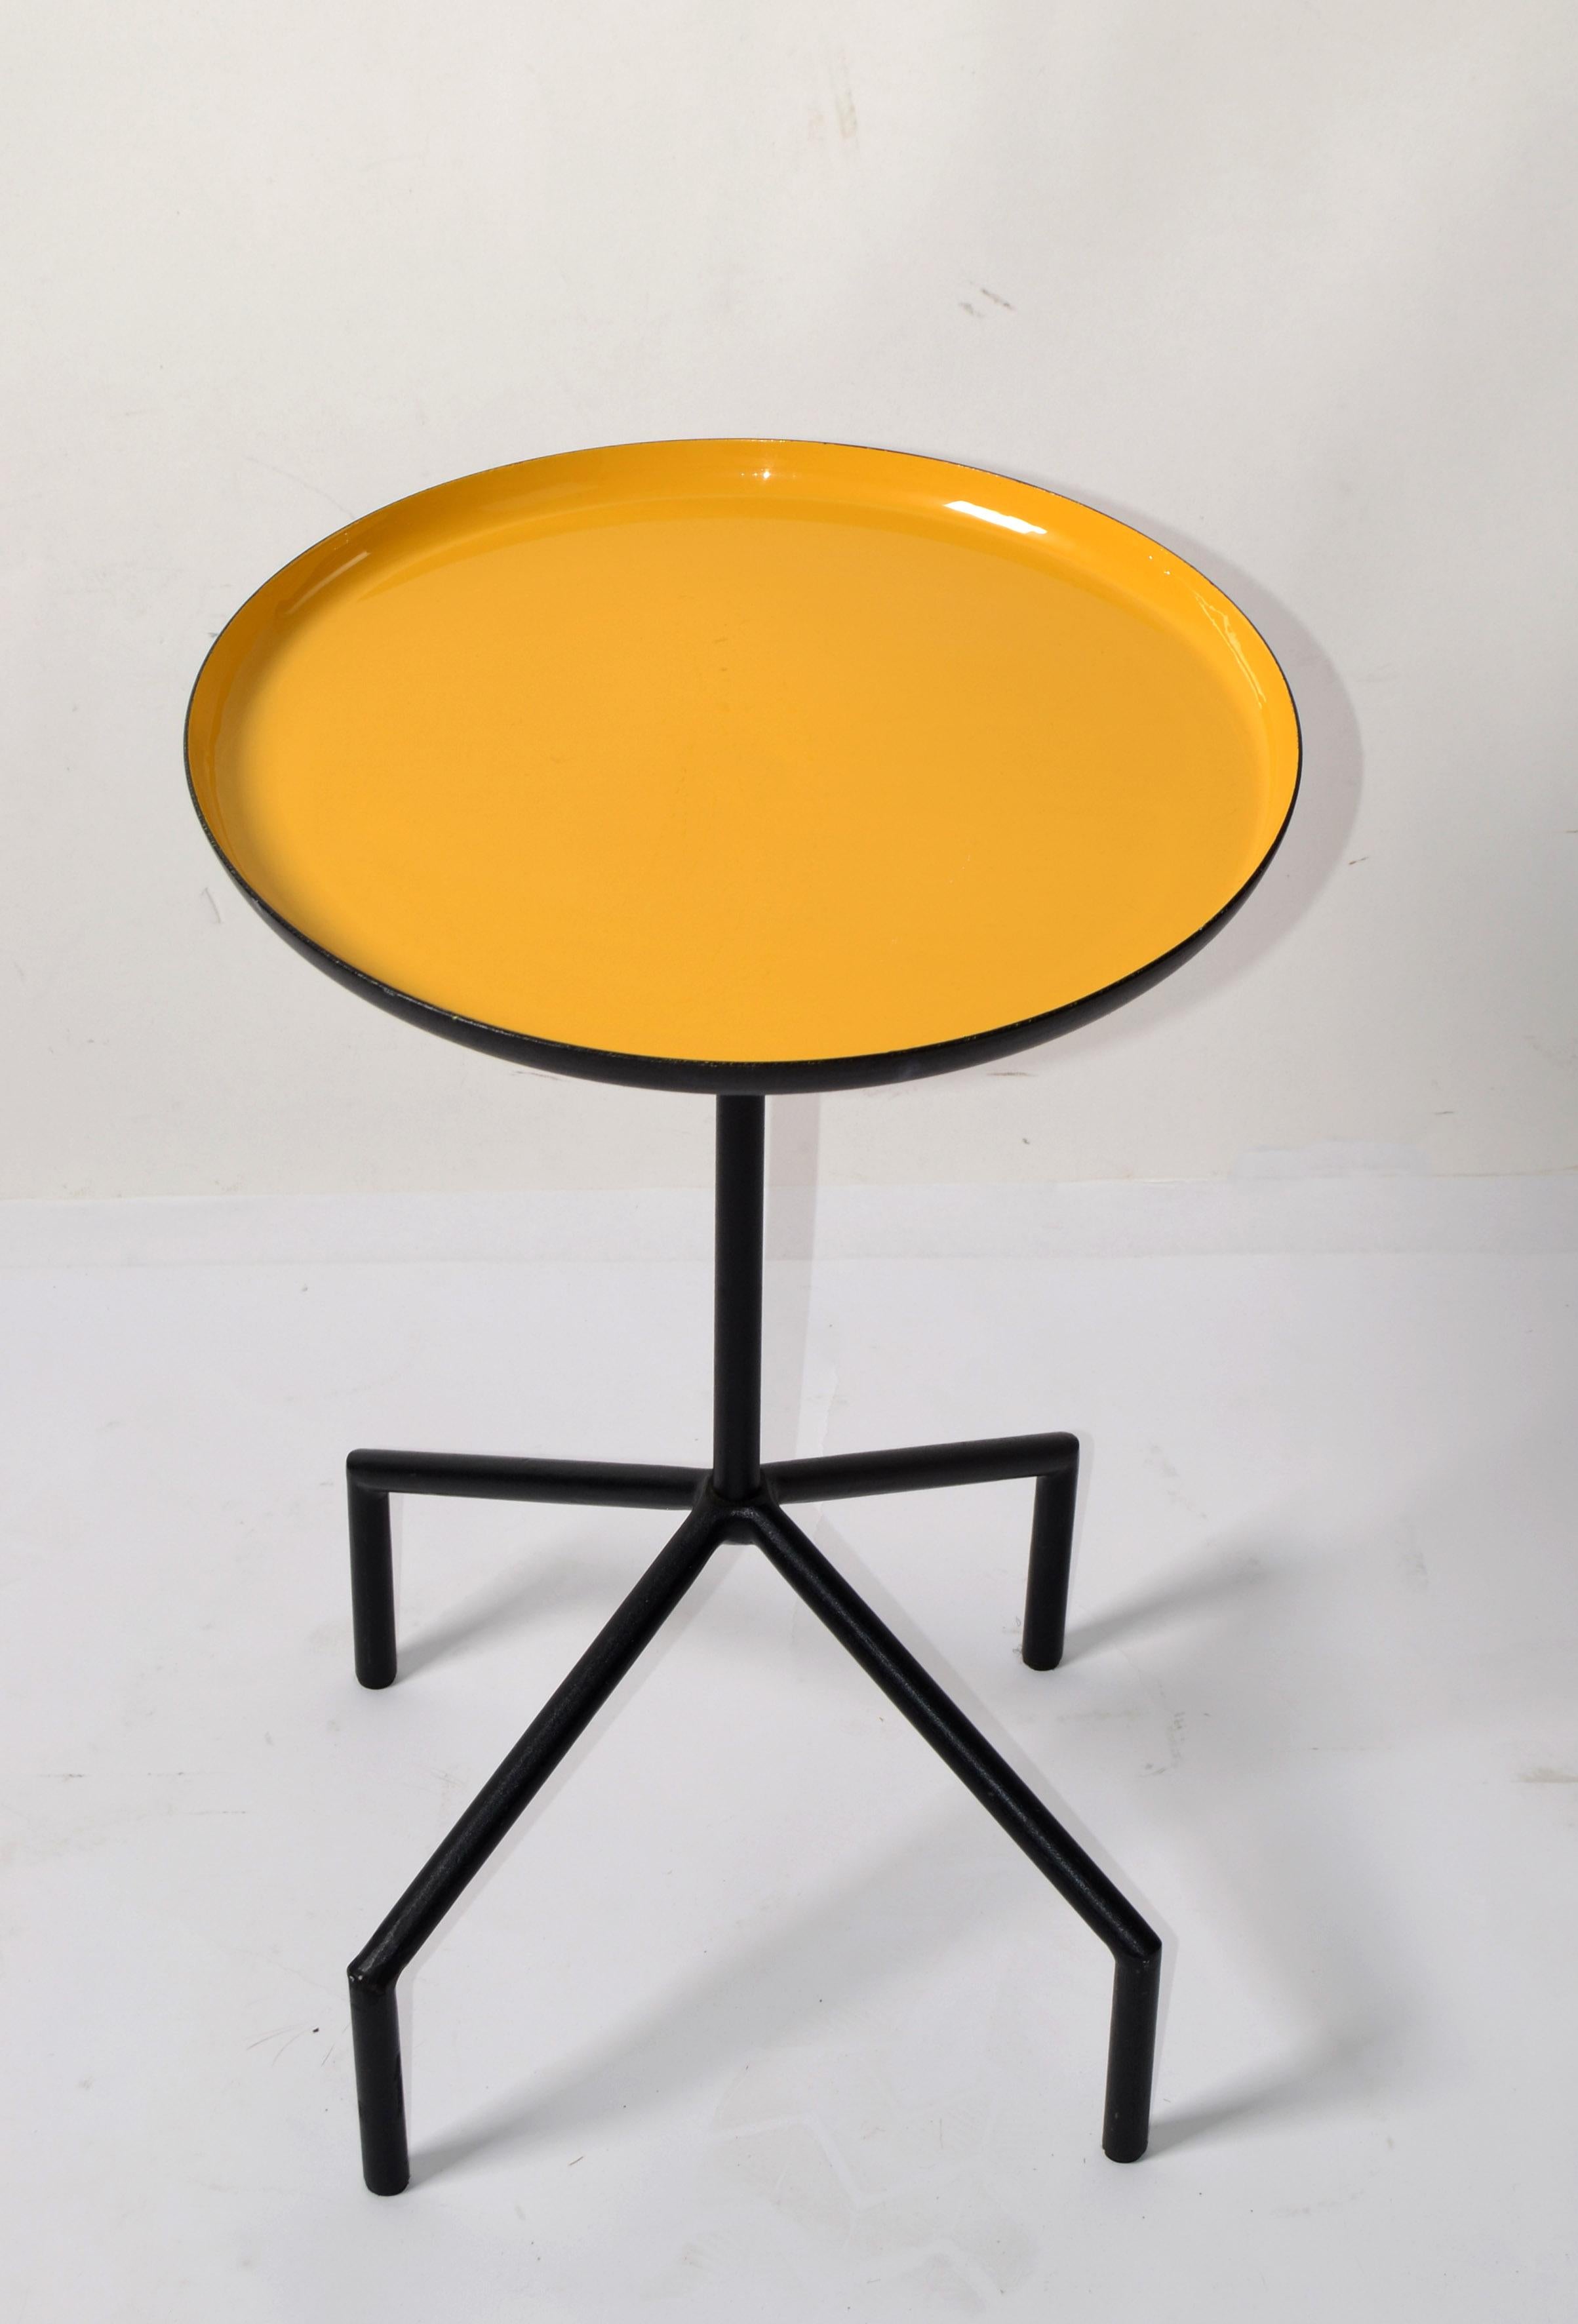 1980 Herman Miller Style Yellow Enamel Tray Side Table Black Iron Gazelle Base In Good Condition For Sale In Miami, FL